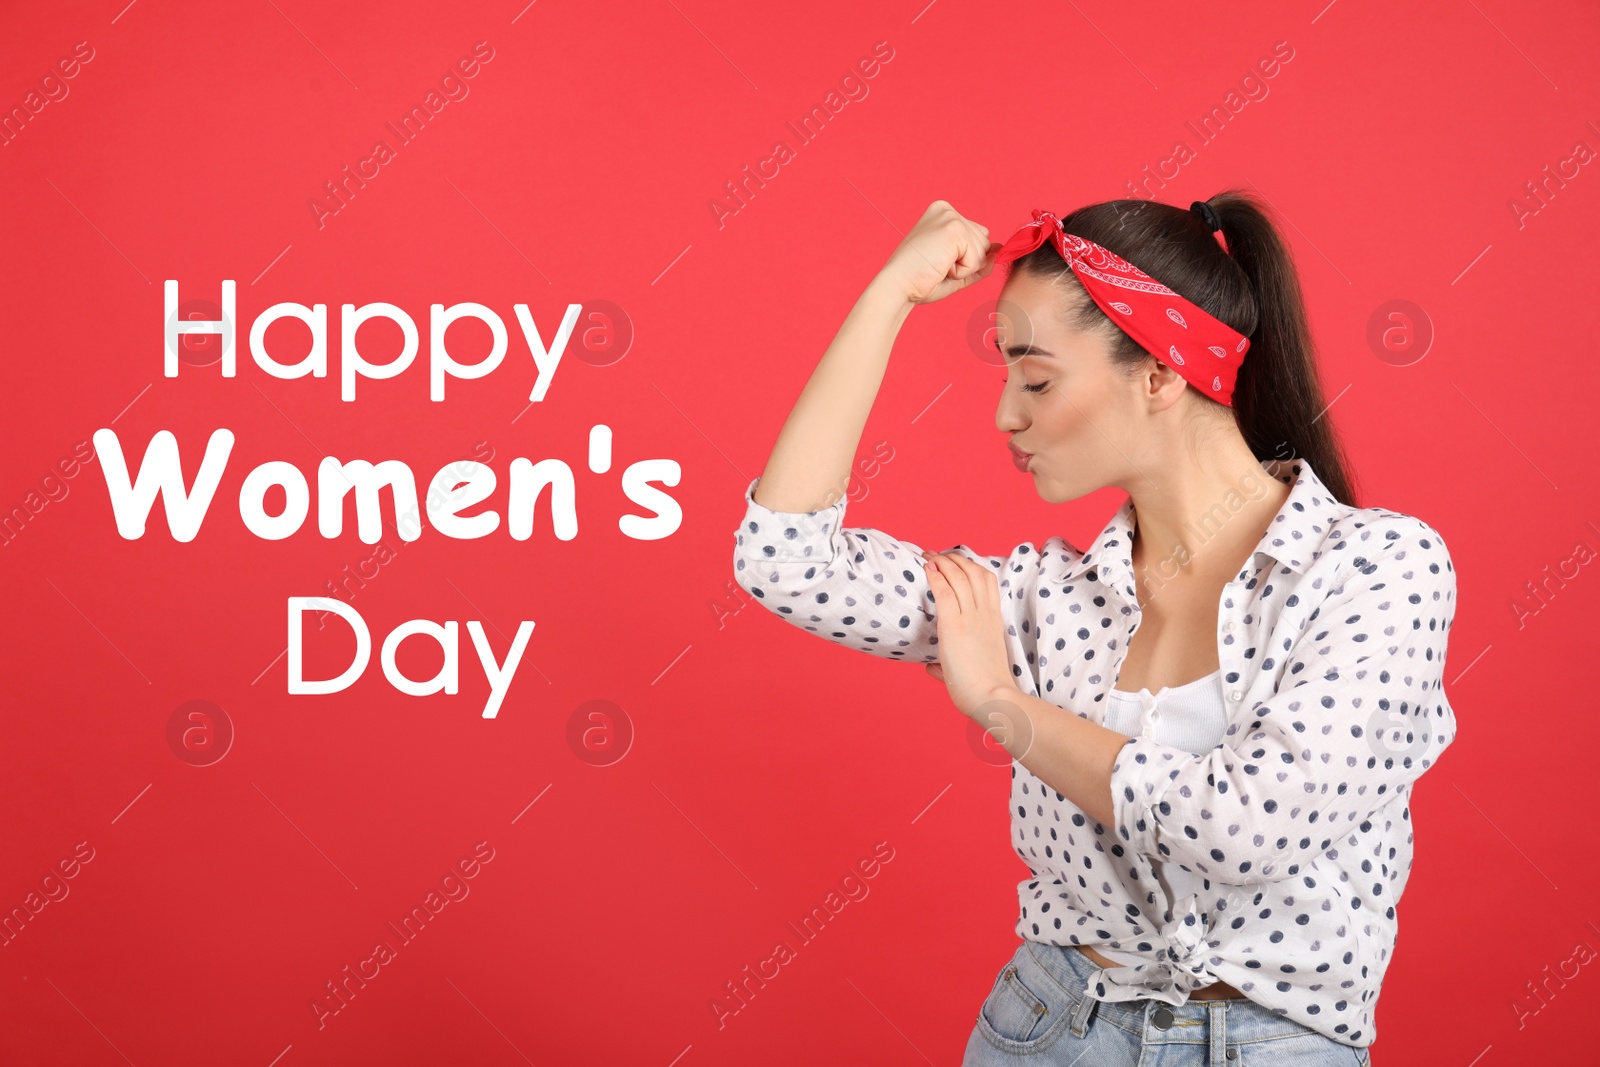 Image of Strong woman as symbol of girl power on red background. Happy Women's Day